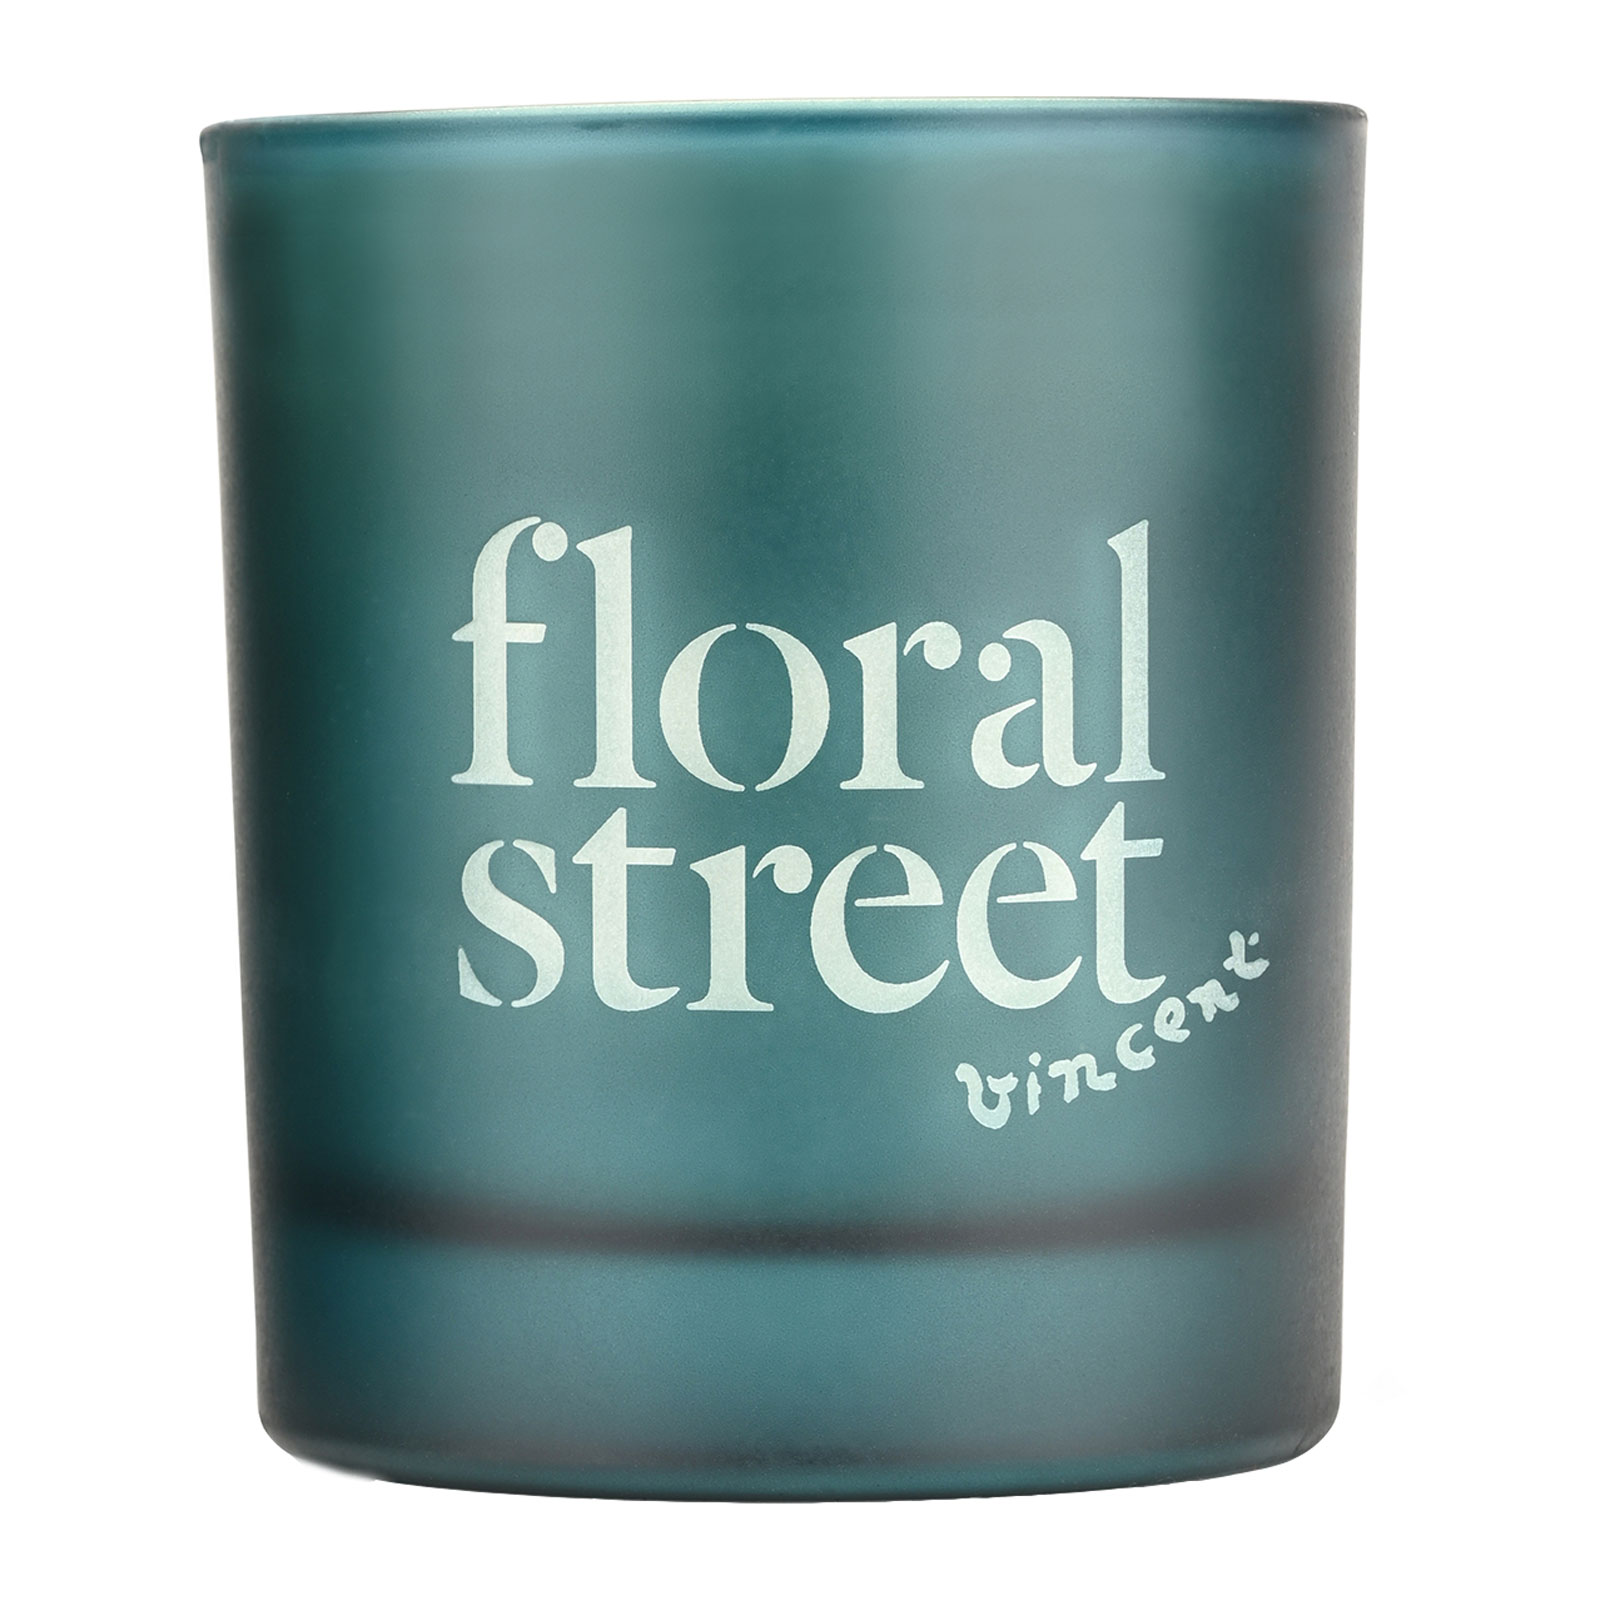 Floral Street Sweet Almond Blossom Candle 200G